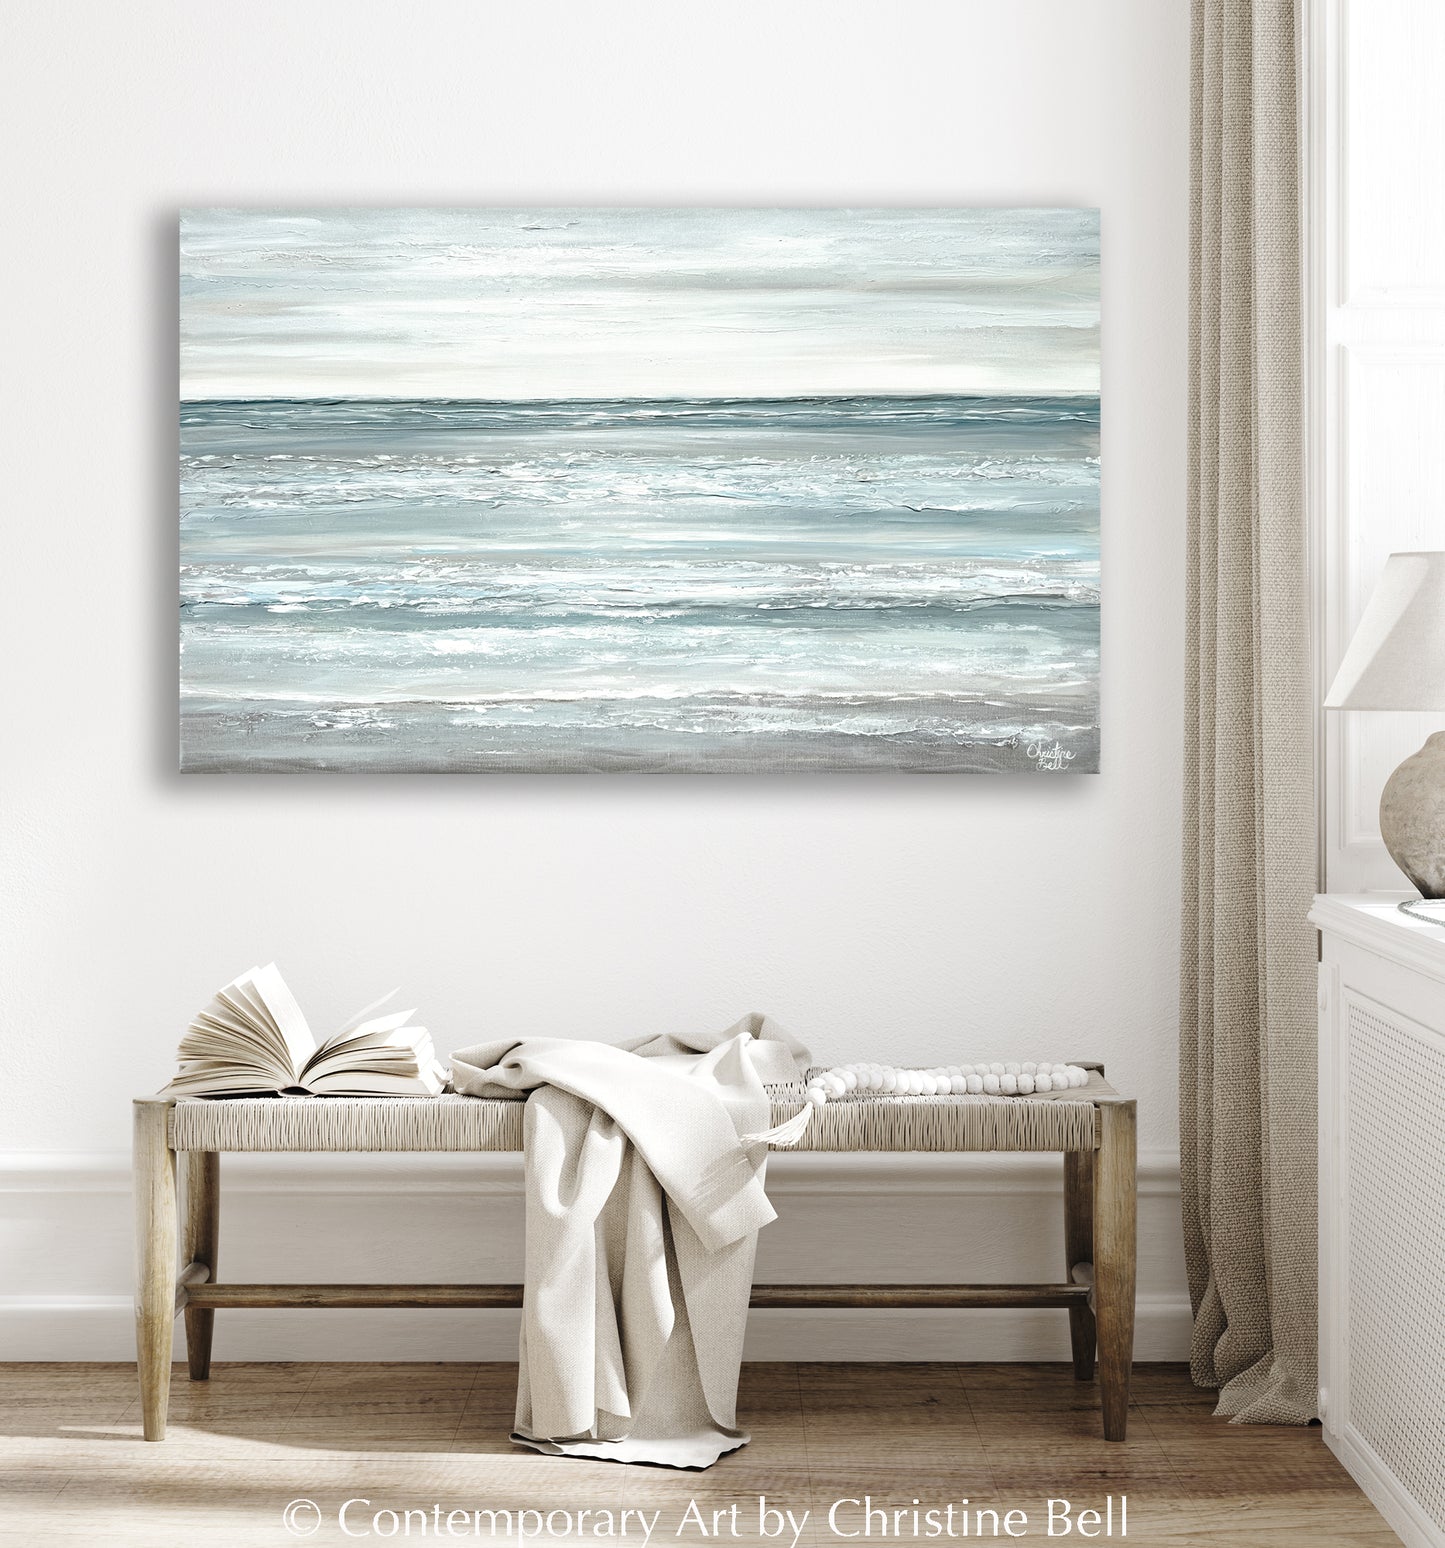 "Seaside Solace" NEW, ORIGINAL, TEXTURED Coastal Abstract Ocean Seascape Painting 48x30"